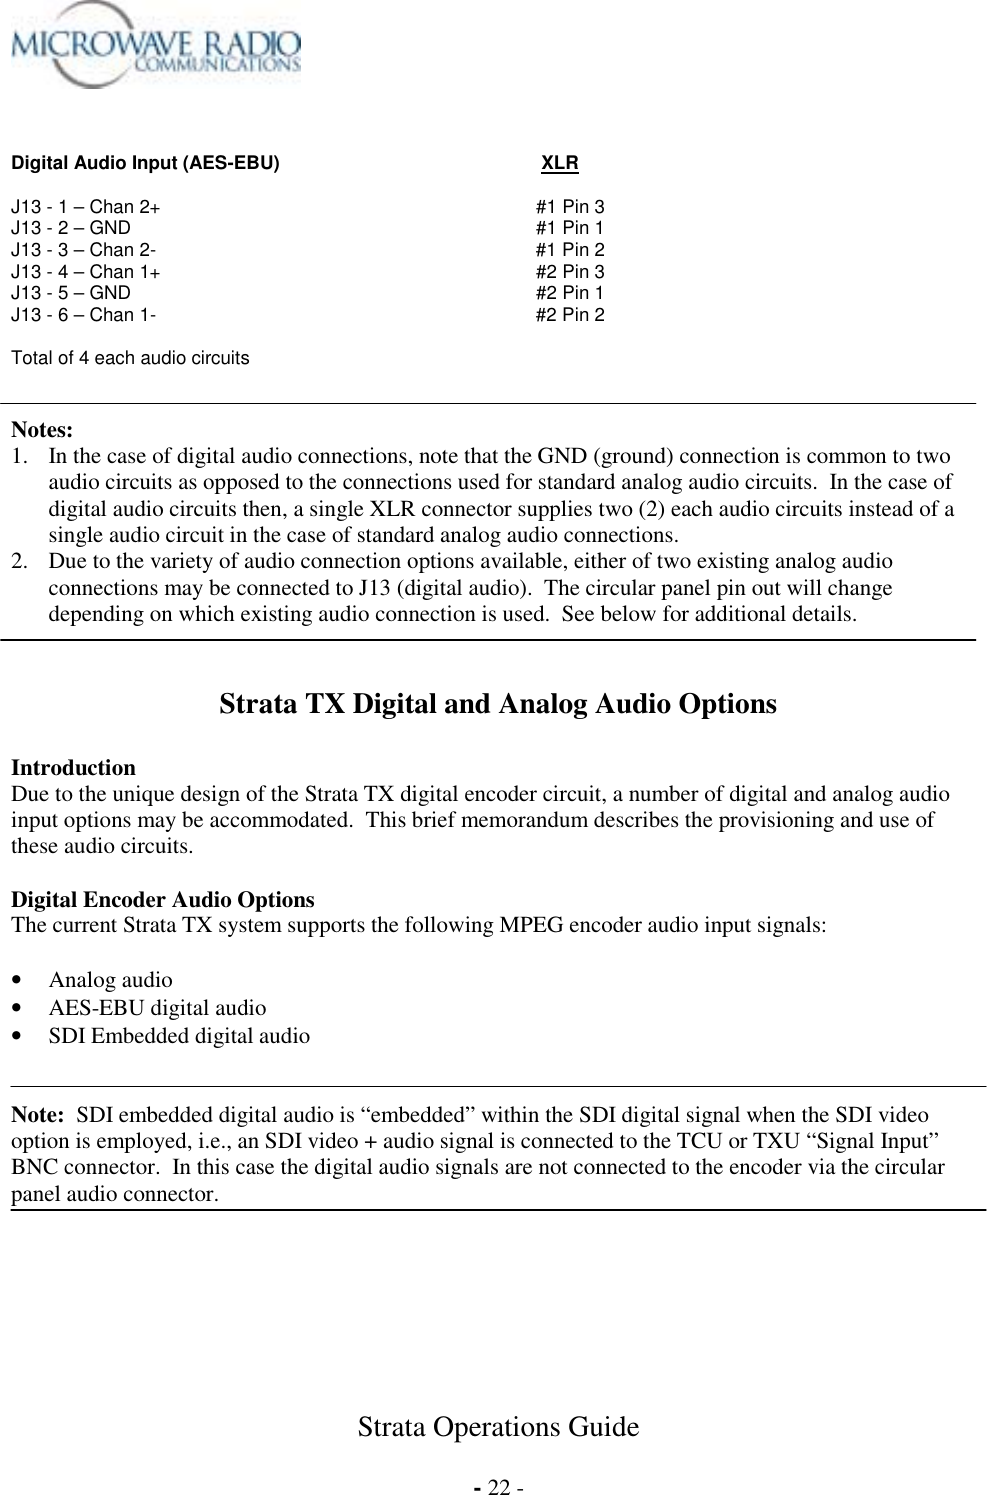  Strata Operations Guide  - 22 -    Digital Audio Input (AES-EBU)         XLR  J13 - 1 – Chan 2+      #1 Pin 3 J13 - 2 – GND       #1 Pin 1 J13 - 3 – Chan 2-      #1 Pin 2 J13 - 4 – Chan 1+      #2 Pin 3 J13 - 5 – GND      #2 Pin 1 J13 - 6 – Chan 1-      #2 Pin 2  Total of 4 each audio circuits    Notes:   1.  In the case of digital audio connections, note that the GND (ground) connection is common to two audio circuits as opposed to the connections used for standard analog audio circuits.  In the case of digital audio circuits then, a single XLR connector supplies two (2) each audio circuits instead of a single audio circuit in the case of standard analog audio connections. 2.  Due to the variety of audio connection options available, either of two existing analog audio connections may be connected to J13 (digital audio).  The circular panel pin out will change depending on which existing audio connection is used.  See below for additional details.   Strata TX Digital and Analog Audio Options  Introduction Due to the unique design of the Strata TX digital encoder circuit, a number of digital and analog audio input options may be accommodated.  This brief memorandum describes the provisioning and use of these audio circuits.  Digital Encoder Audio Options The current Strata TX system supports the following MPEG encoder audio input signals:  •  Analog audio •  AES-EBU digital audio •  SDI Embedded digital audio   Note:  SDI embedded digital audio is “embedded” within the SDI digital signal when the SDI video option is employed, i.e., an SDI video + audio signal is connected to the TCU or TXU “Signal Input” BNC connector.  In this case the digital audio signals are not connected to the encoder via the circular panel audio connector.   